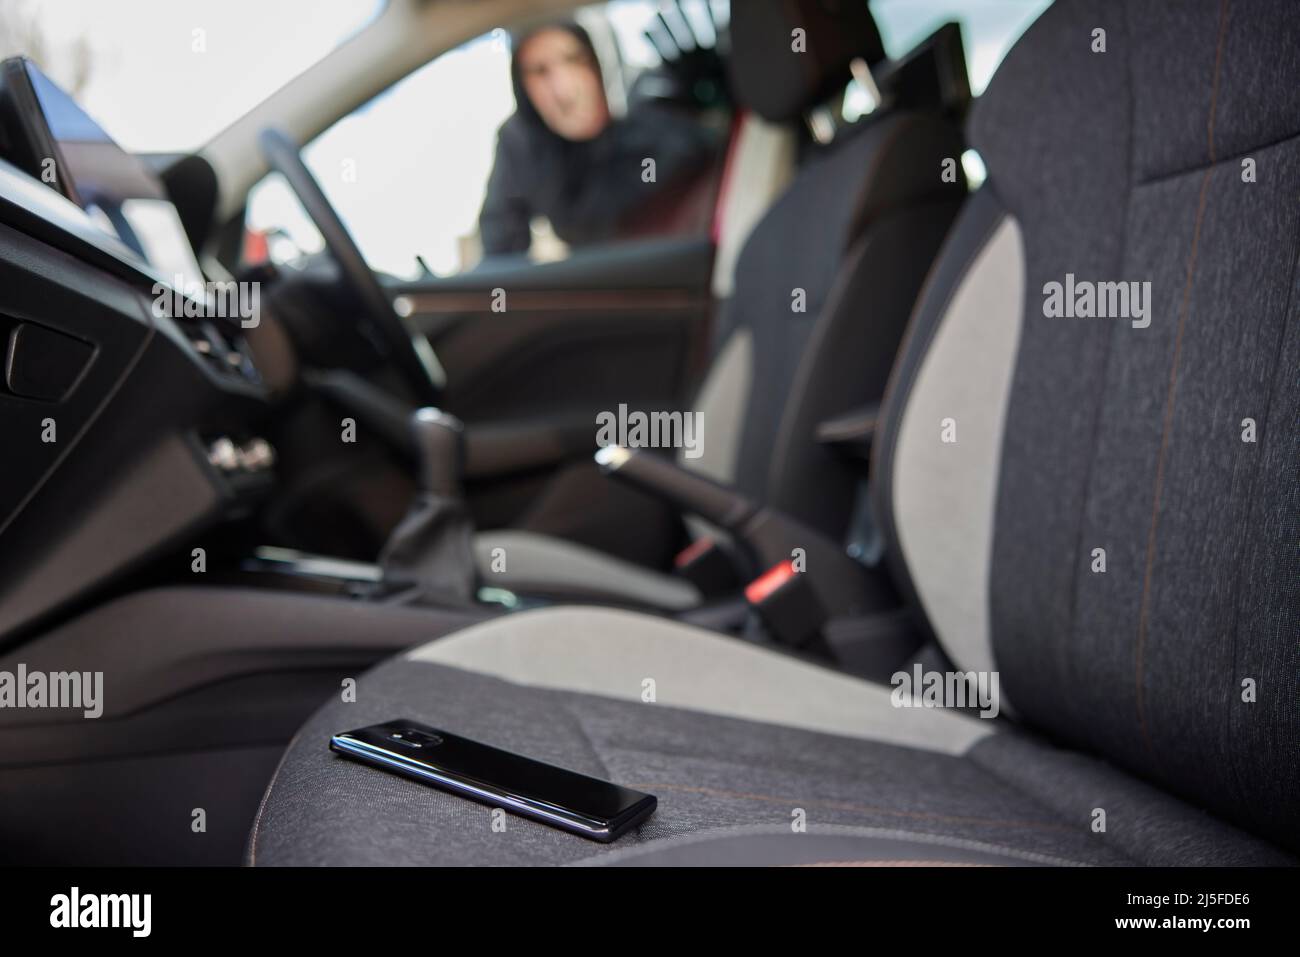 Male Thief Looking Through Car Window At Mobile Phone Left On Seat Stock Photo